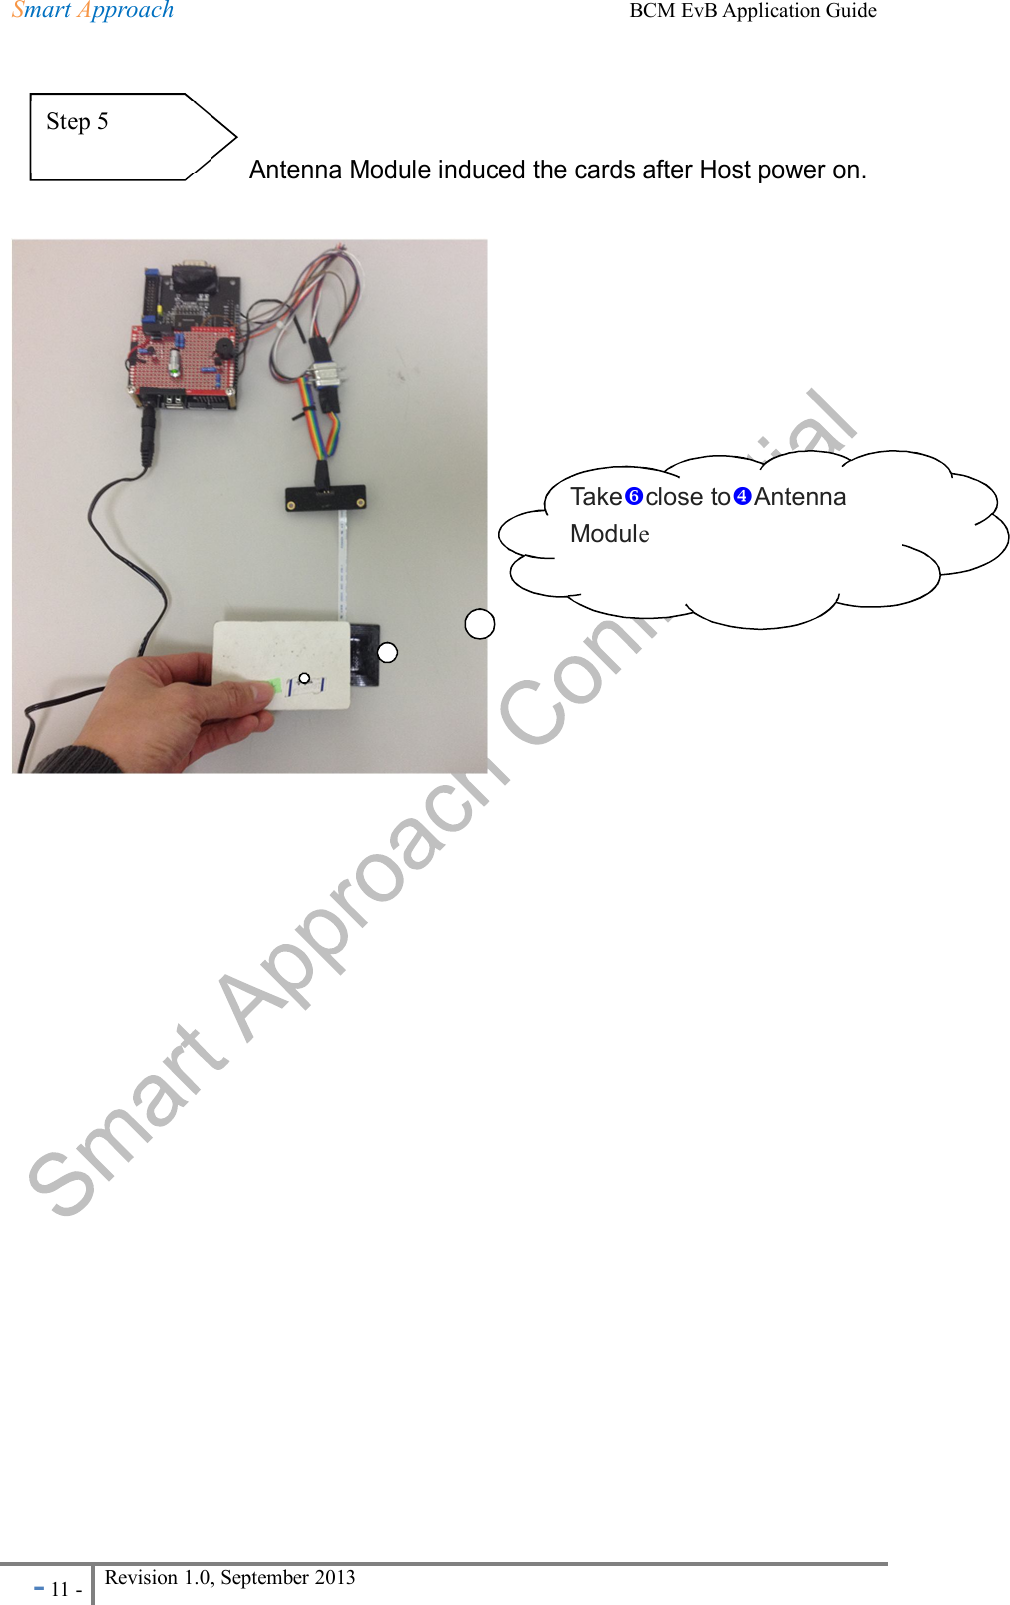 Smart Approach    BCM EvB Application Guide - 11 - Revision 1.0, September 2013                                                                   Antenna Module induced the cards after Host power on.                 Step 5                      Takeclose toAntenna Module 